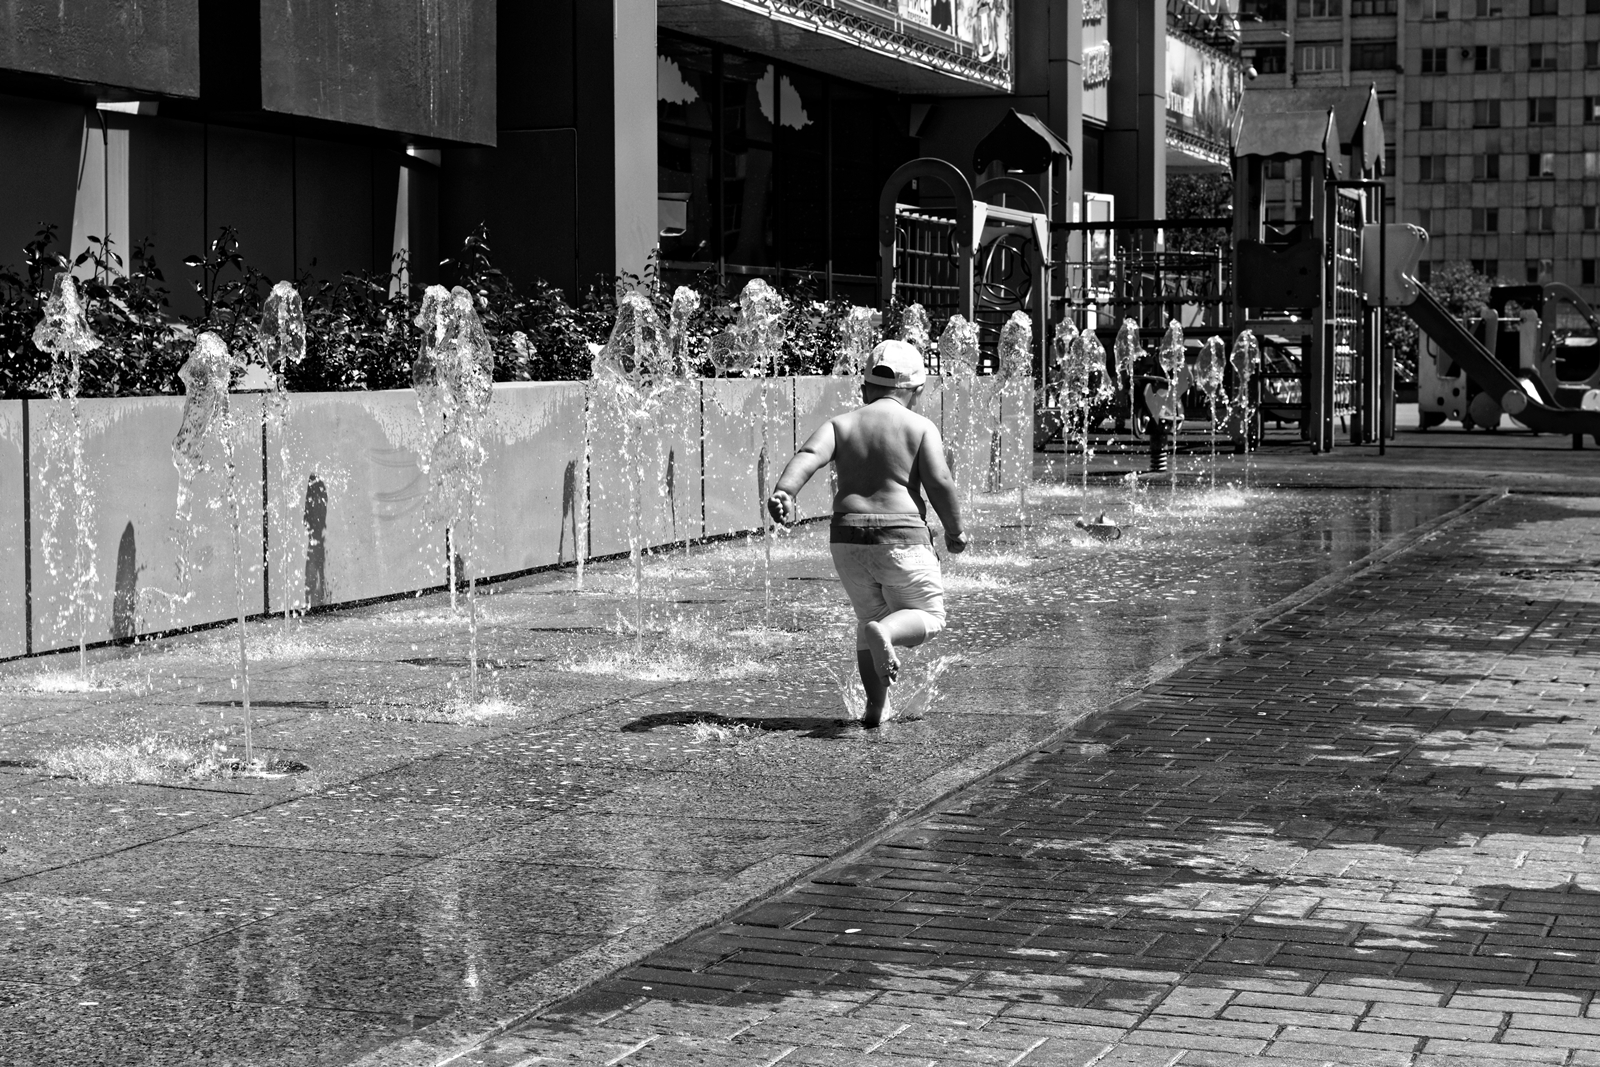 carefree time - My, Photo, Black and white, The street, Fountain, Fun, Childhood